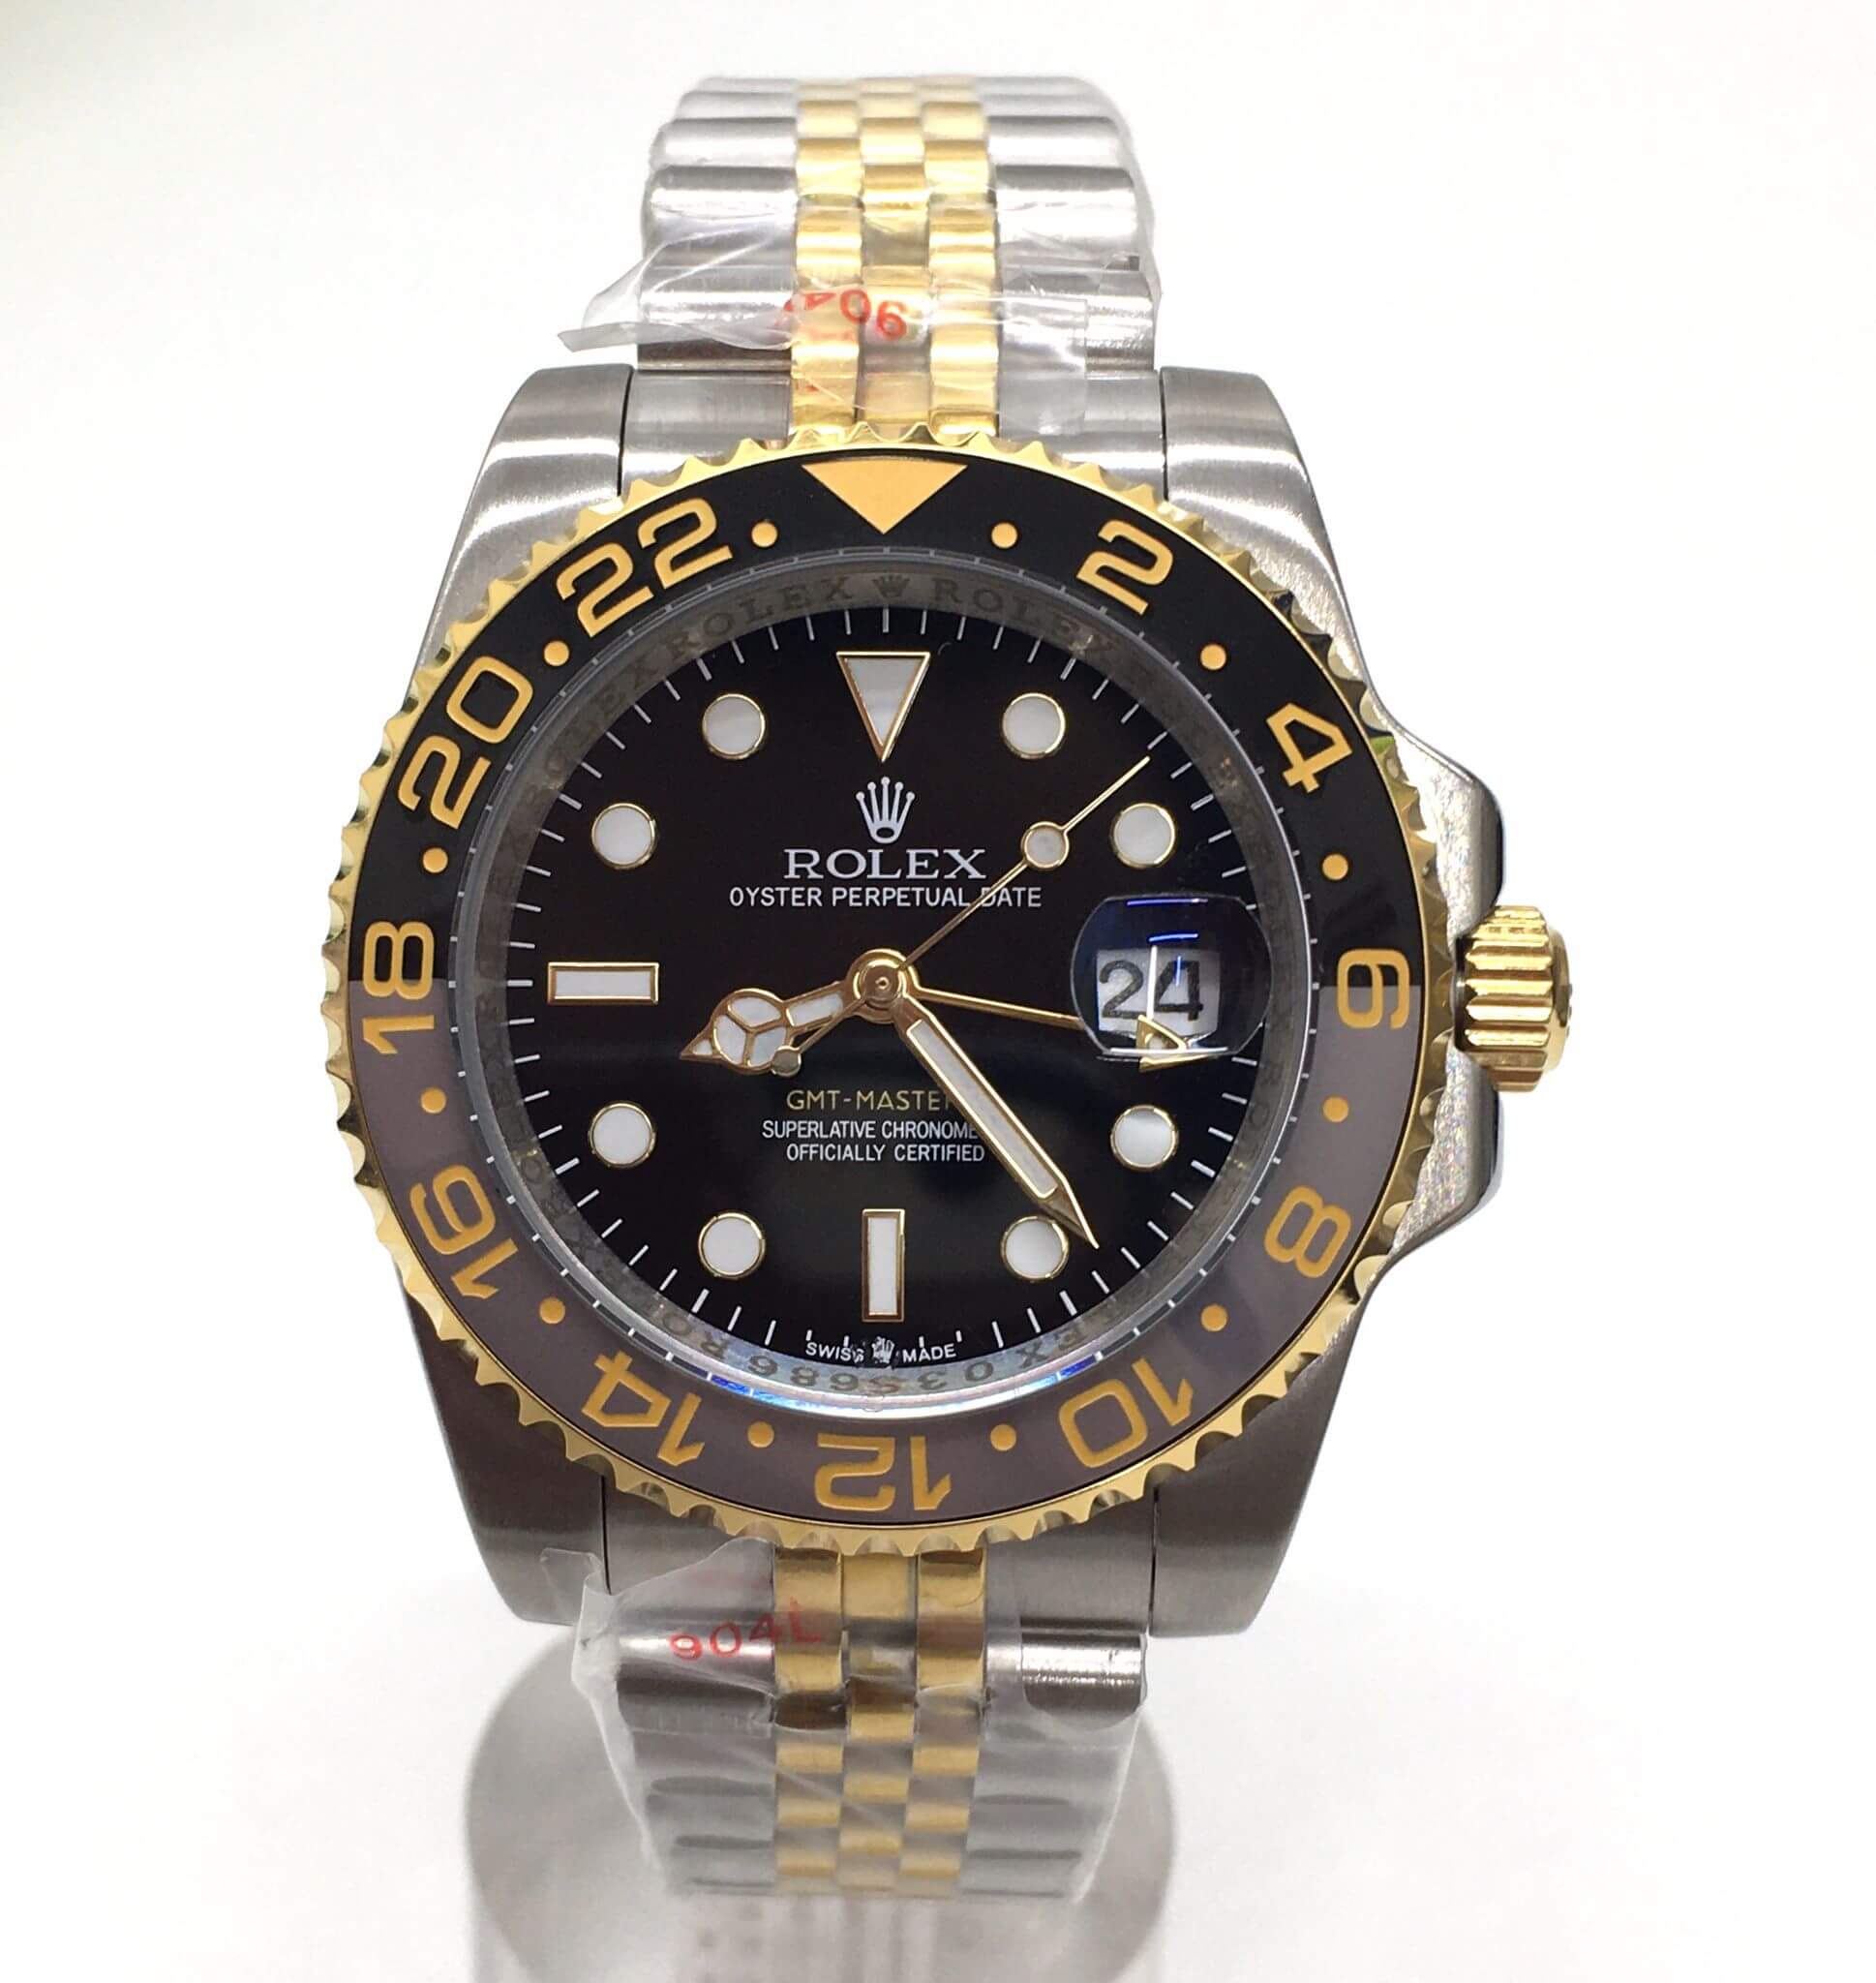 Fake Rolex GMT-MASTER II watch in the UK